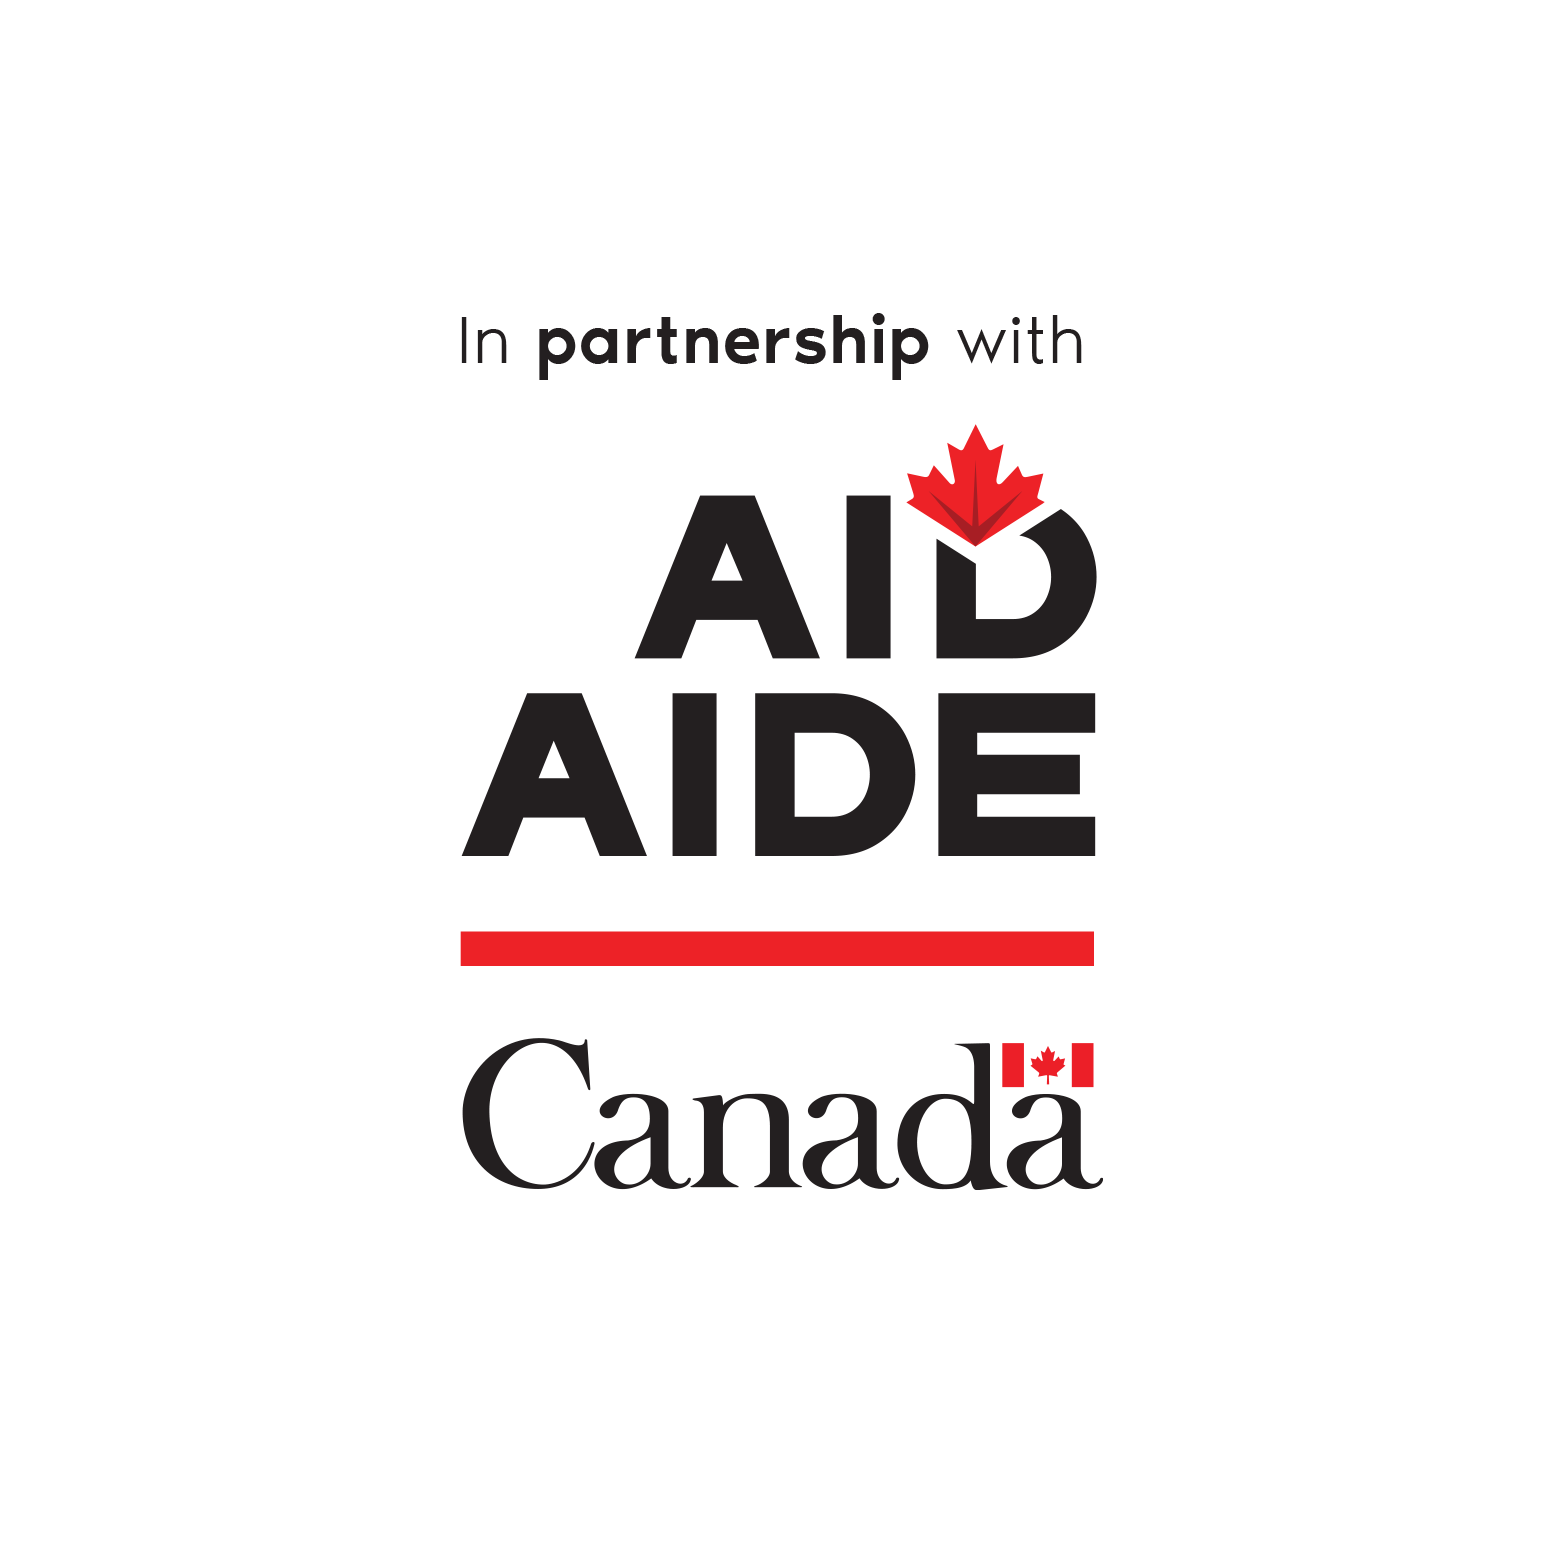 The image shows the words “In partnership with” across the top of the image, the word “Aid” in all-caps with a maple leaf affixed to the top of the “D”, the French equivalent “Aide” underneath, a red horizontal line, and the Canada Wordmark.